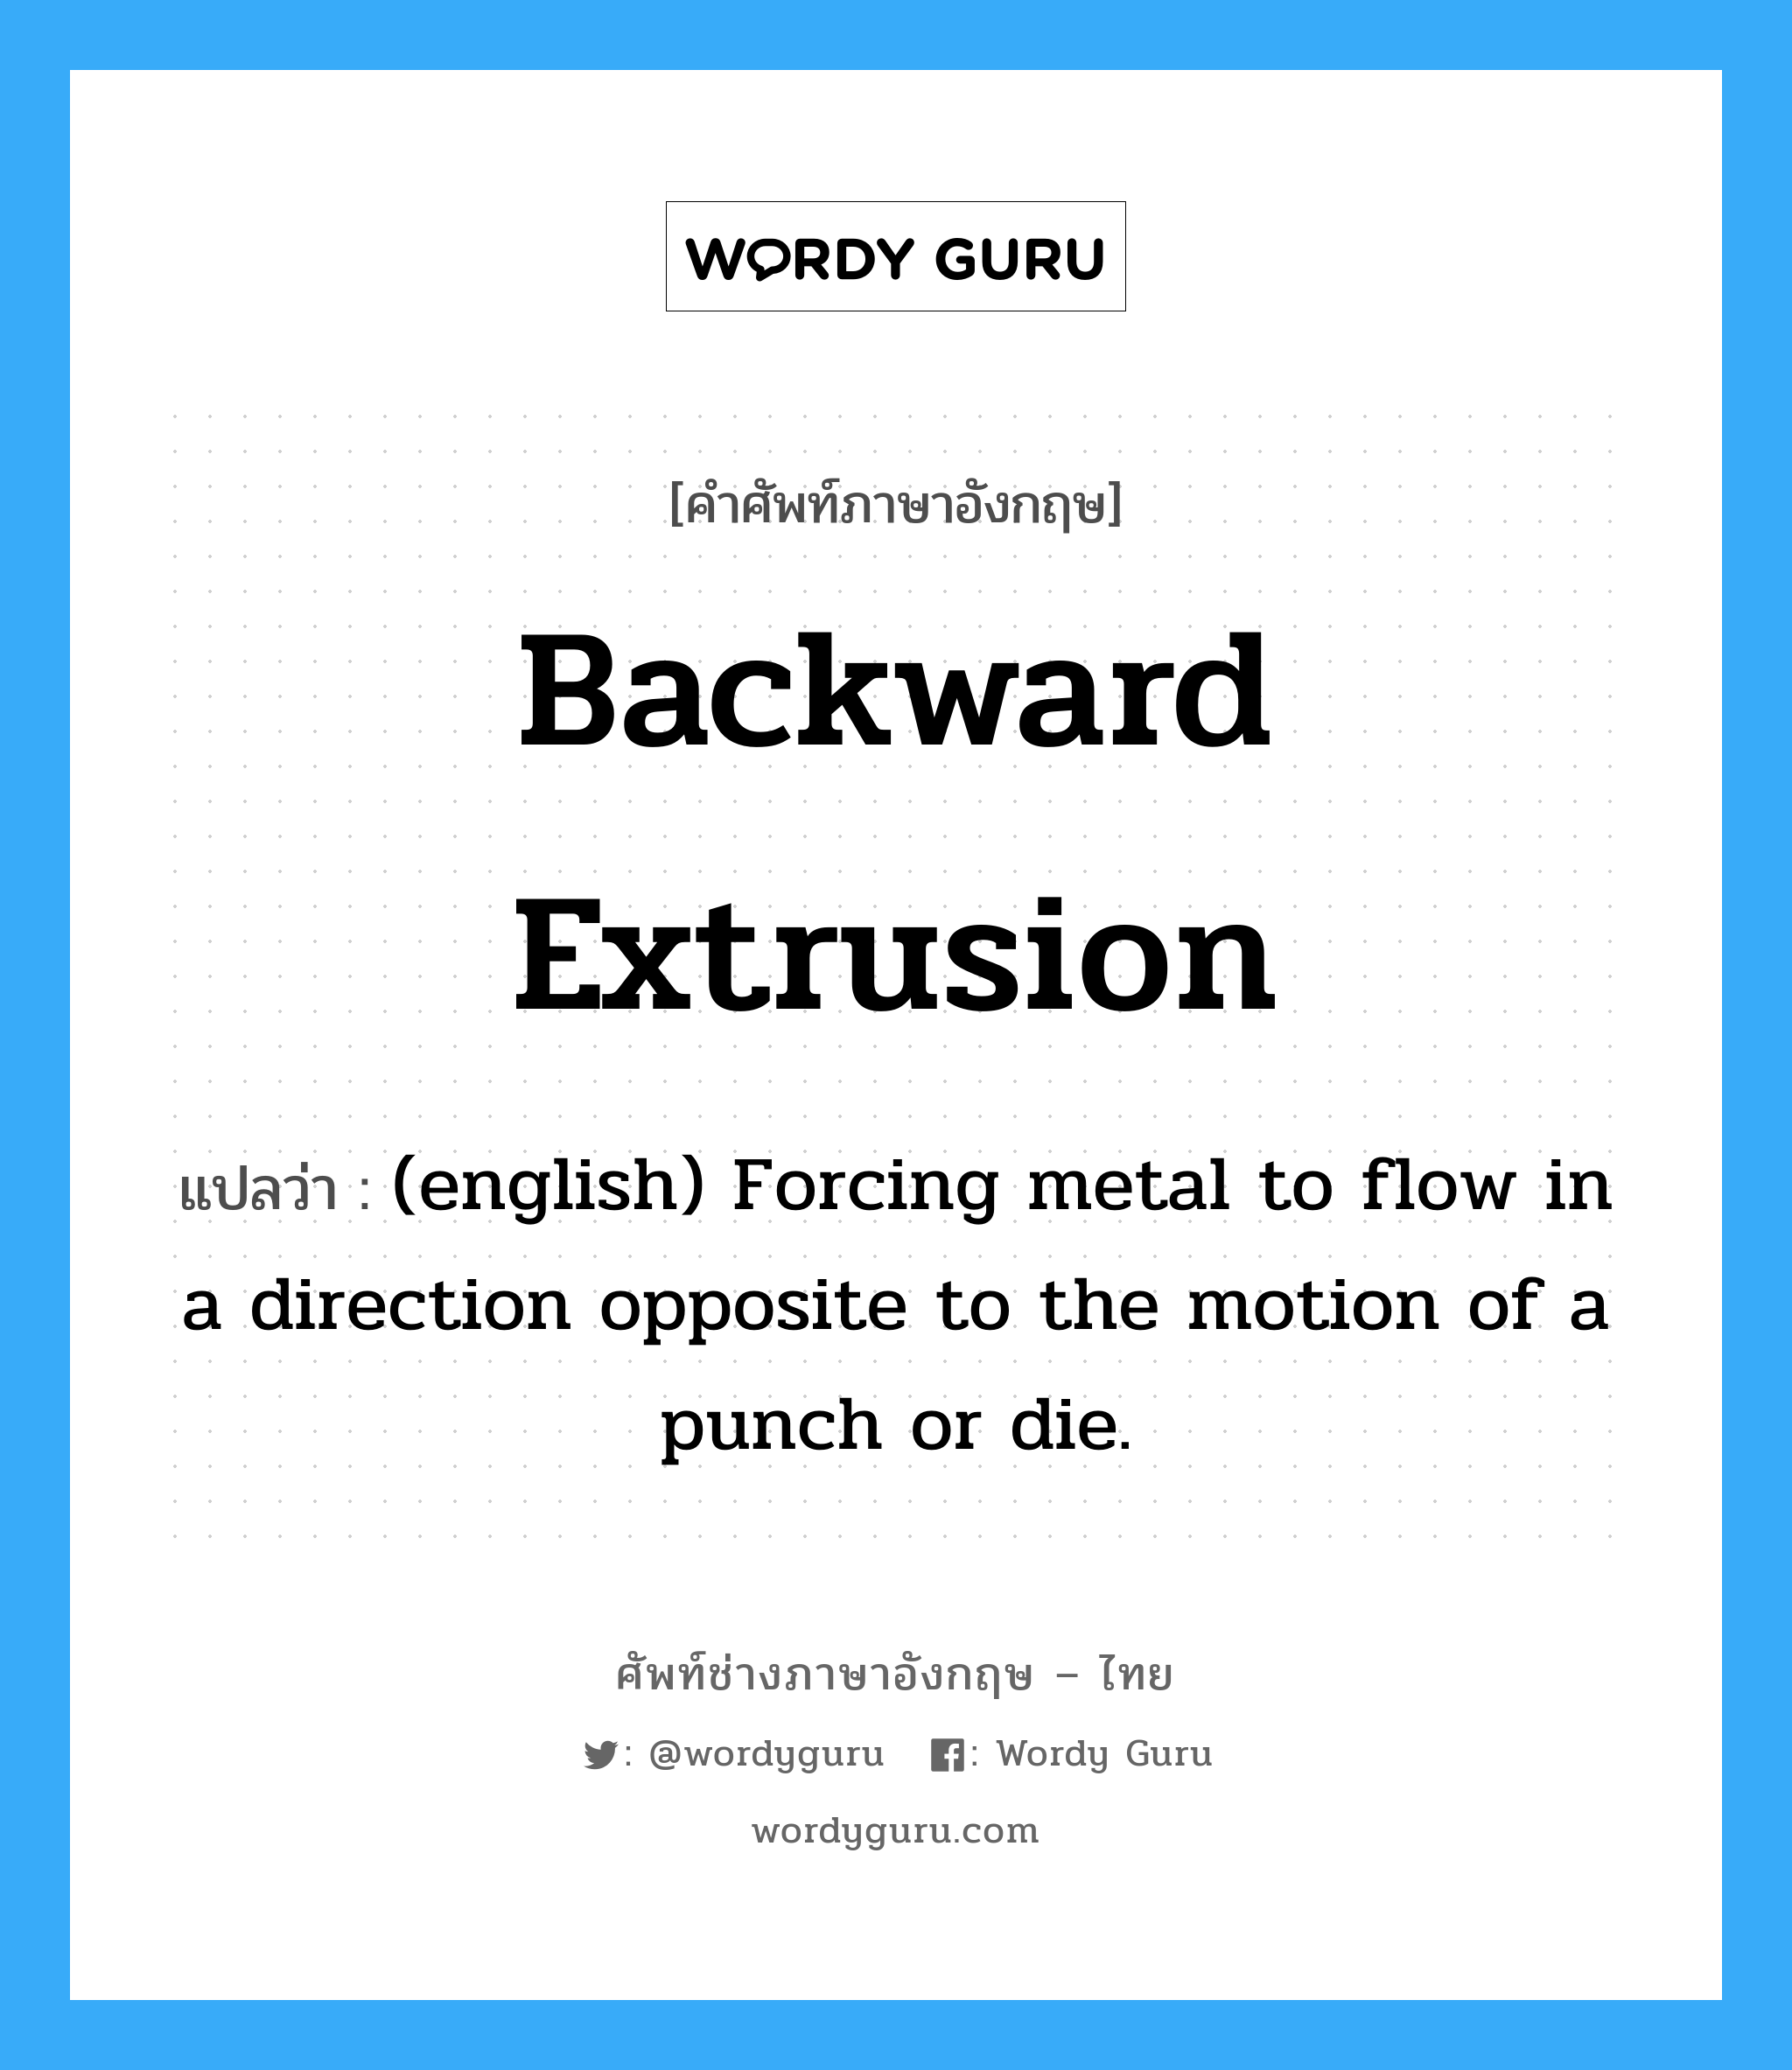 Backward Extrusion แปลว่า?, คำศัพท์ช่างภาษาอังกฤษ - ไทย Backward Extrusion คำศัพท์ภาษาอังกฤษ Backward Extrusion แปลว่า (english) Forcing metal to flow in a direction opposite to the motion of a punch or die.